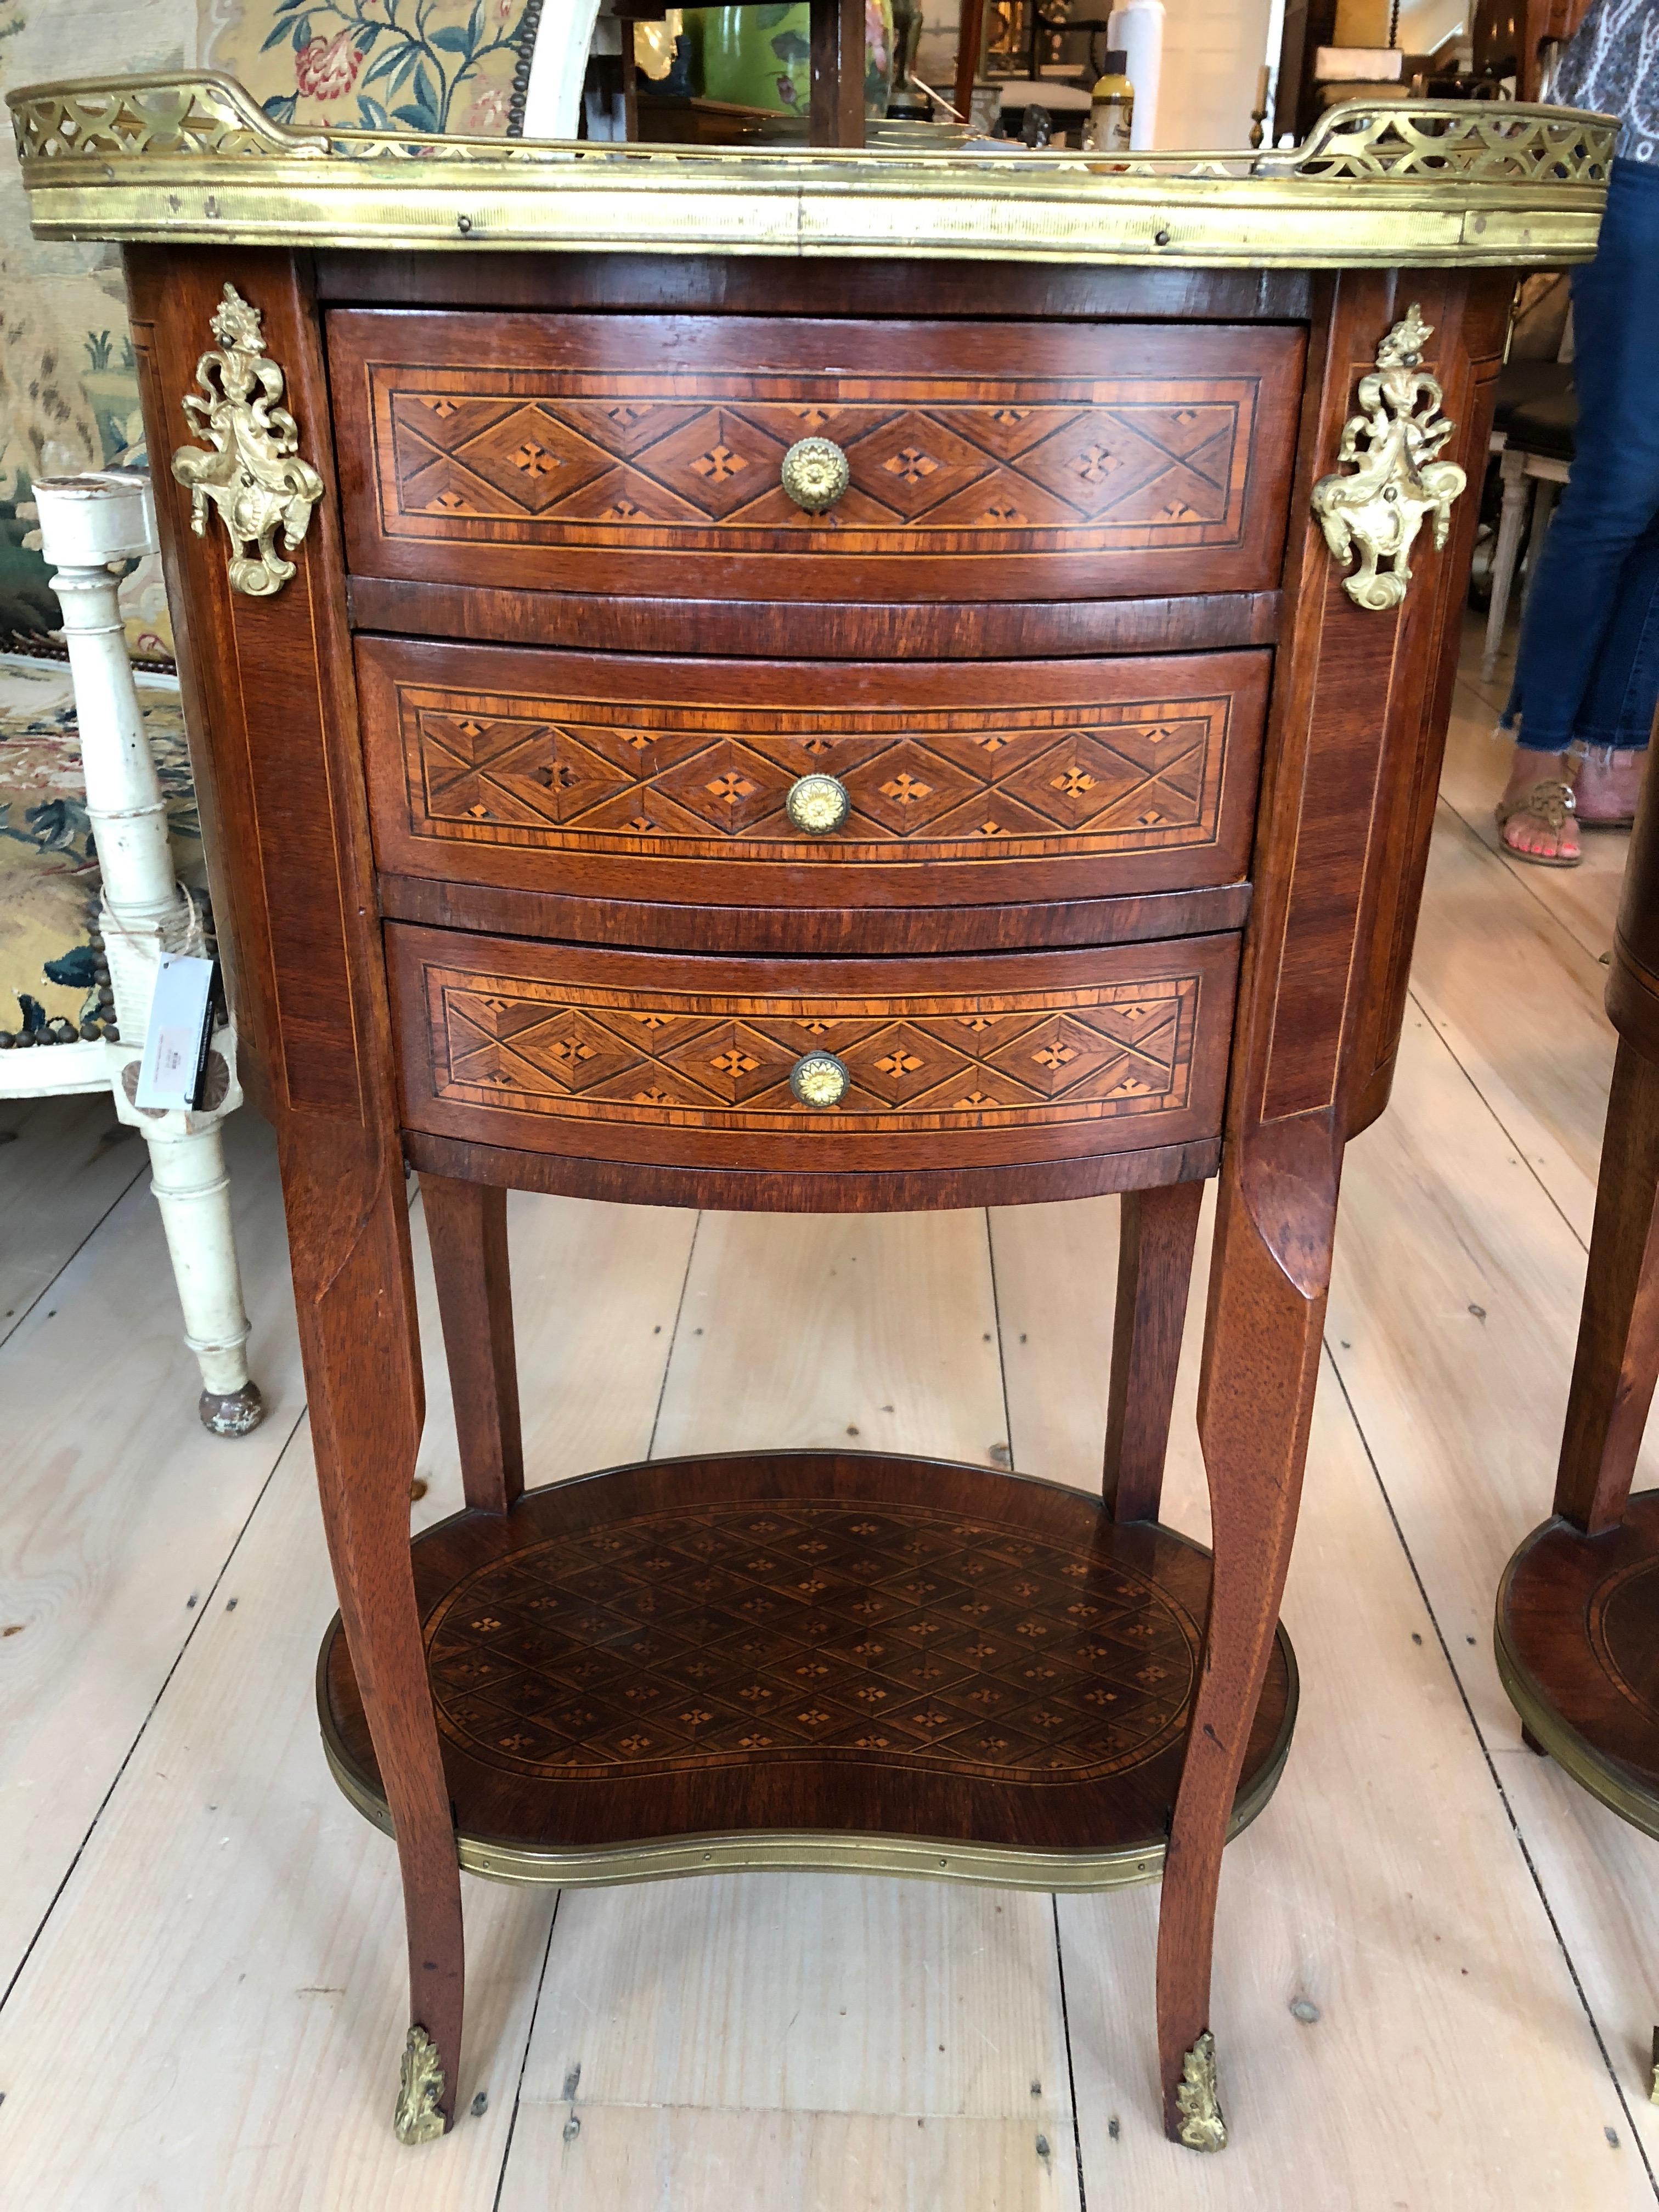 Elegant and unusual to find pair of mahogany oval night stands having creamy marble tops surrounded by brass gallery, three drawers, lovely inlay work, and ormolu details. The best part is that they are not exactly alike, with small variations that